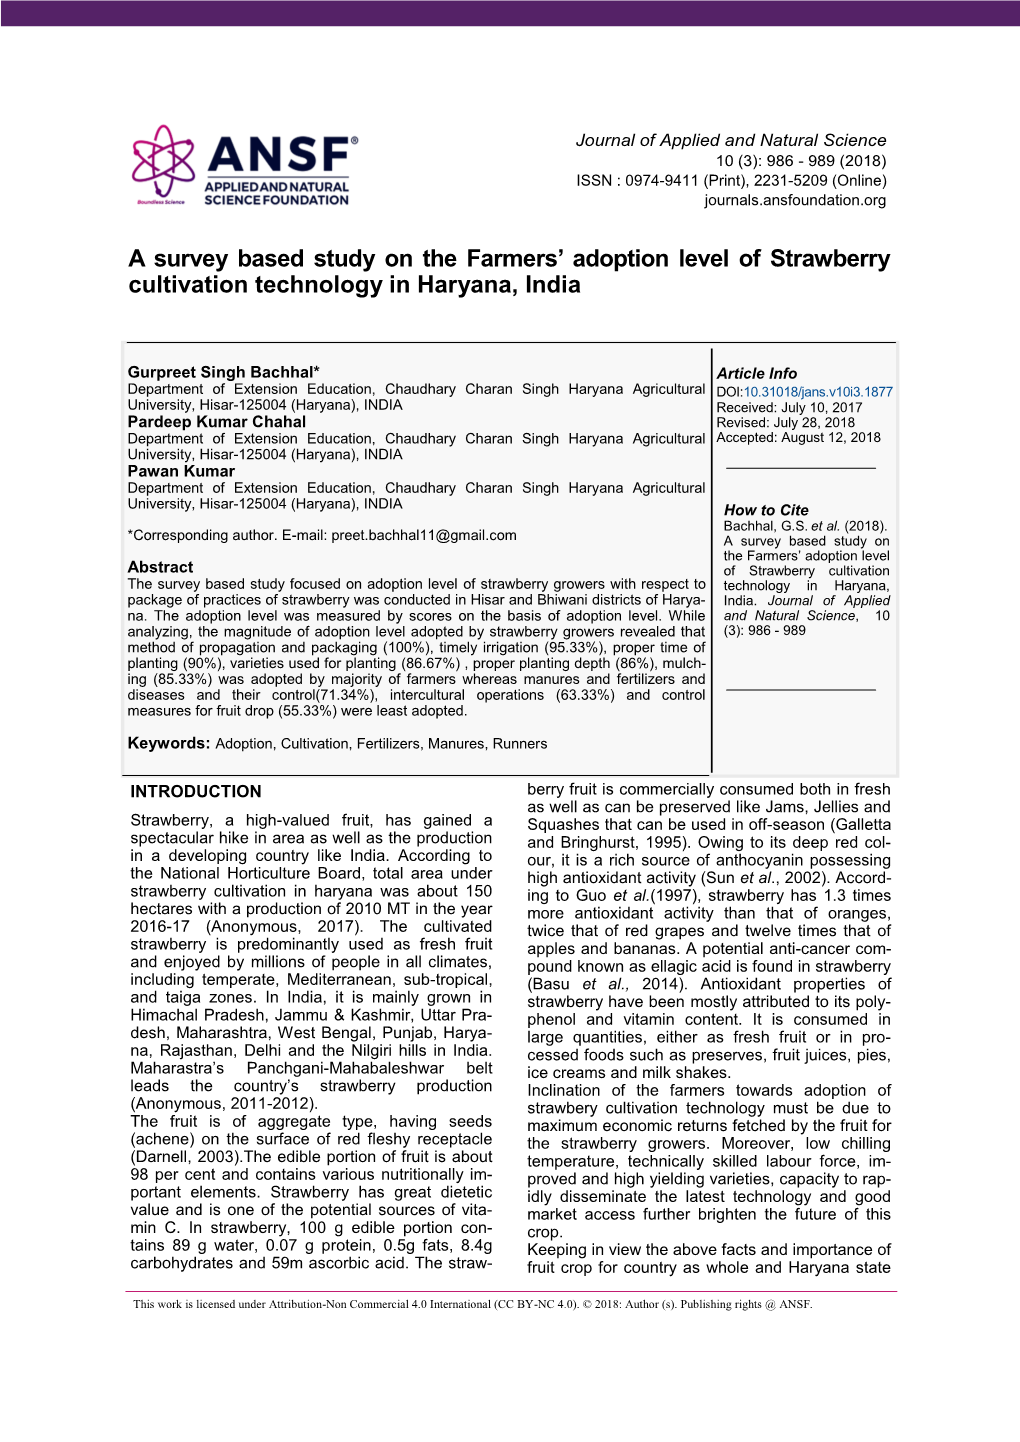 A Survey Based Study on the Farmers' Adoption Level of Strawberry Cultivation Technology in Haryana, India